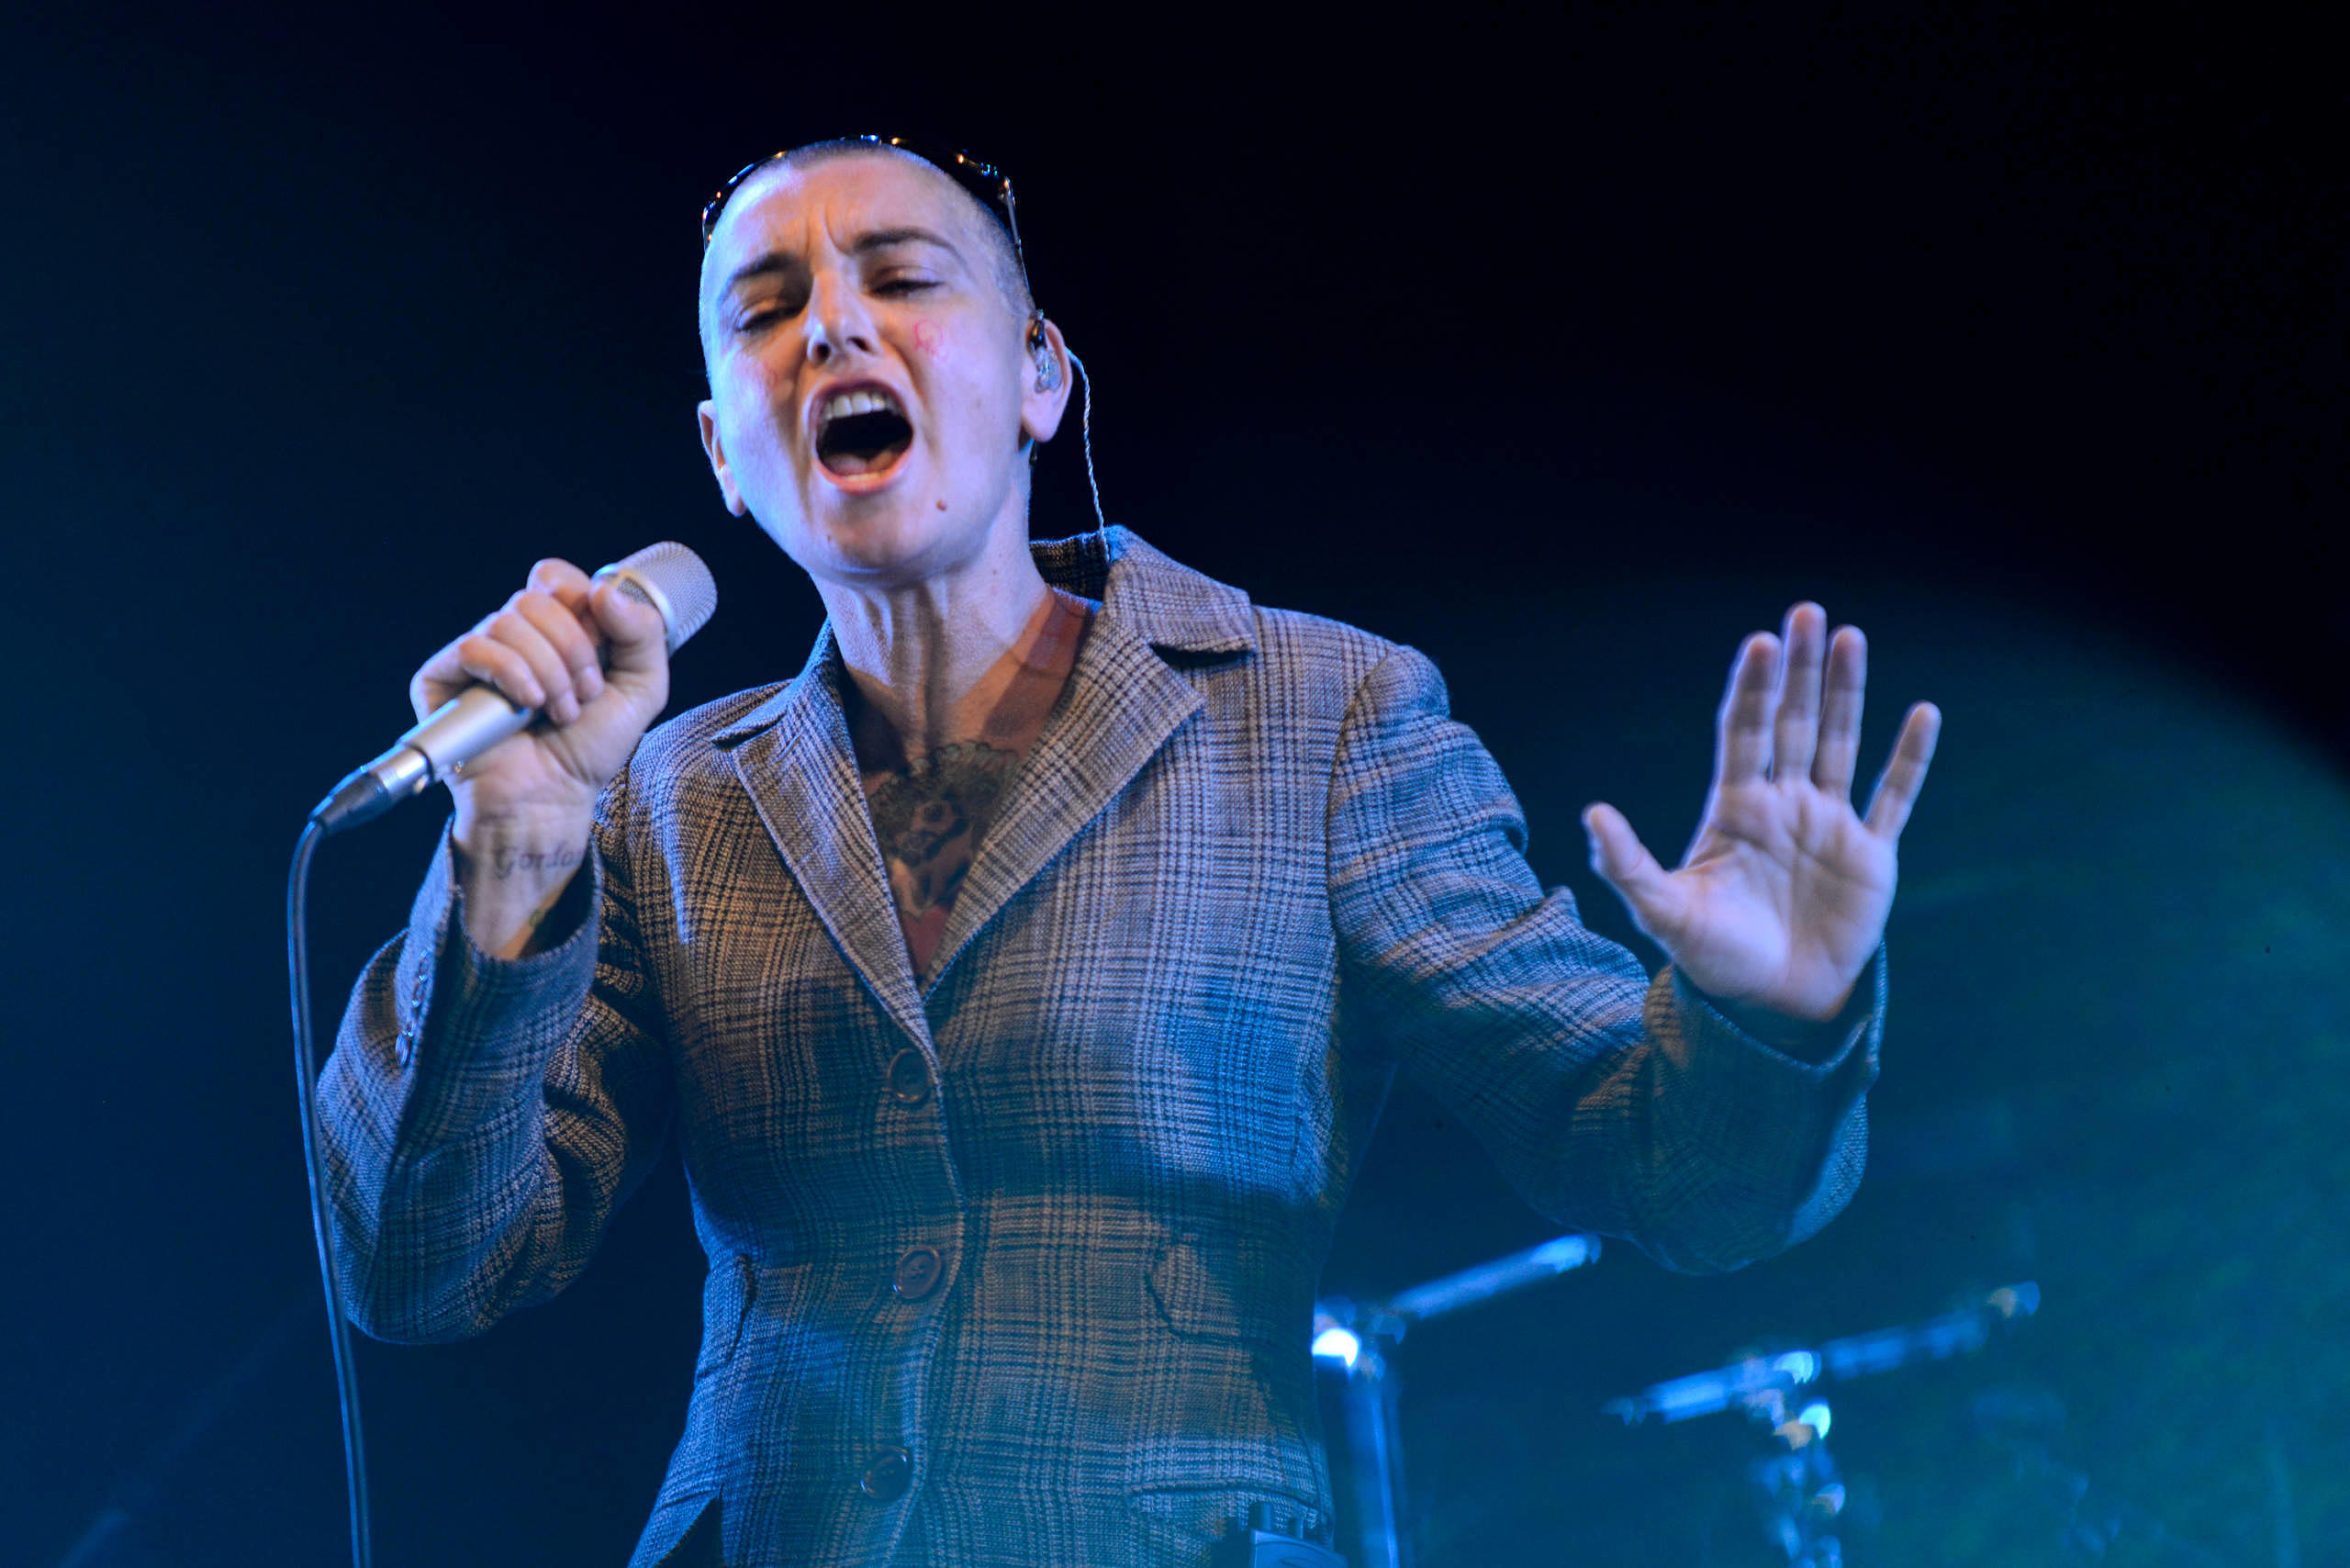 Sinéad O’Connor 2013 in Newport, Isle of Wight.